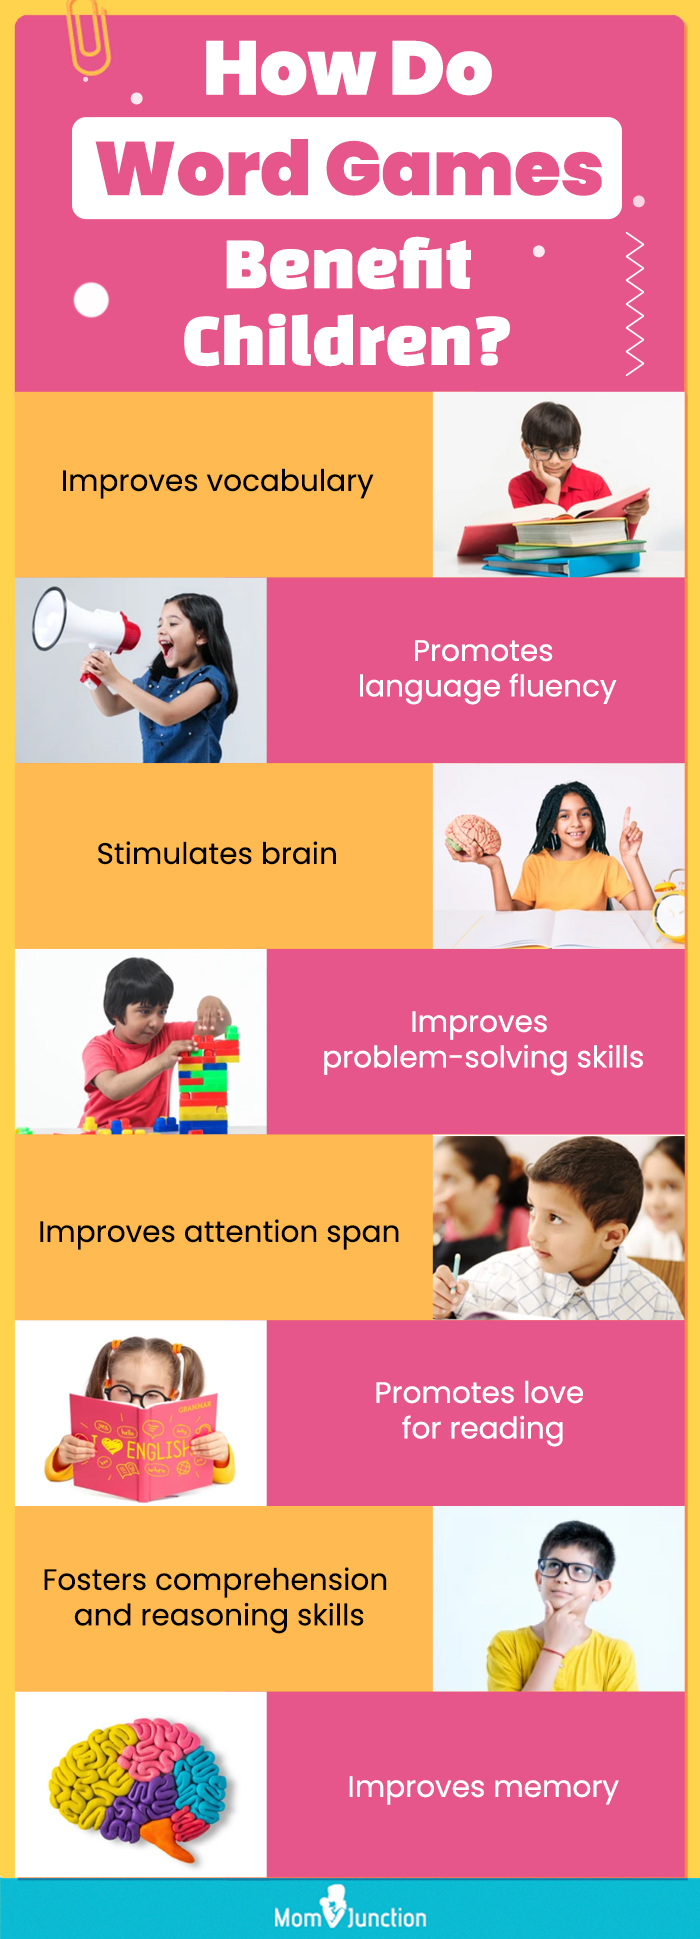 how do word games benefit children (infographic)